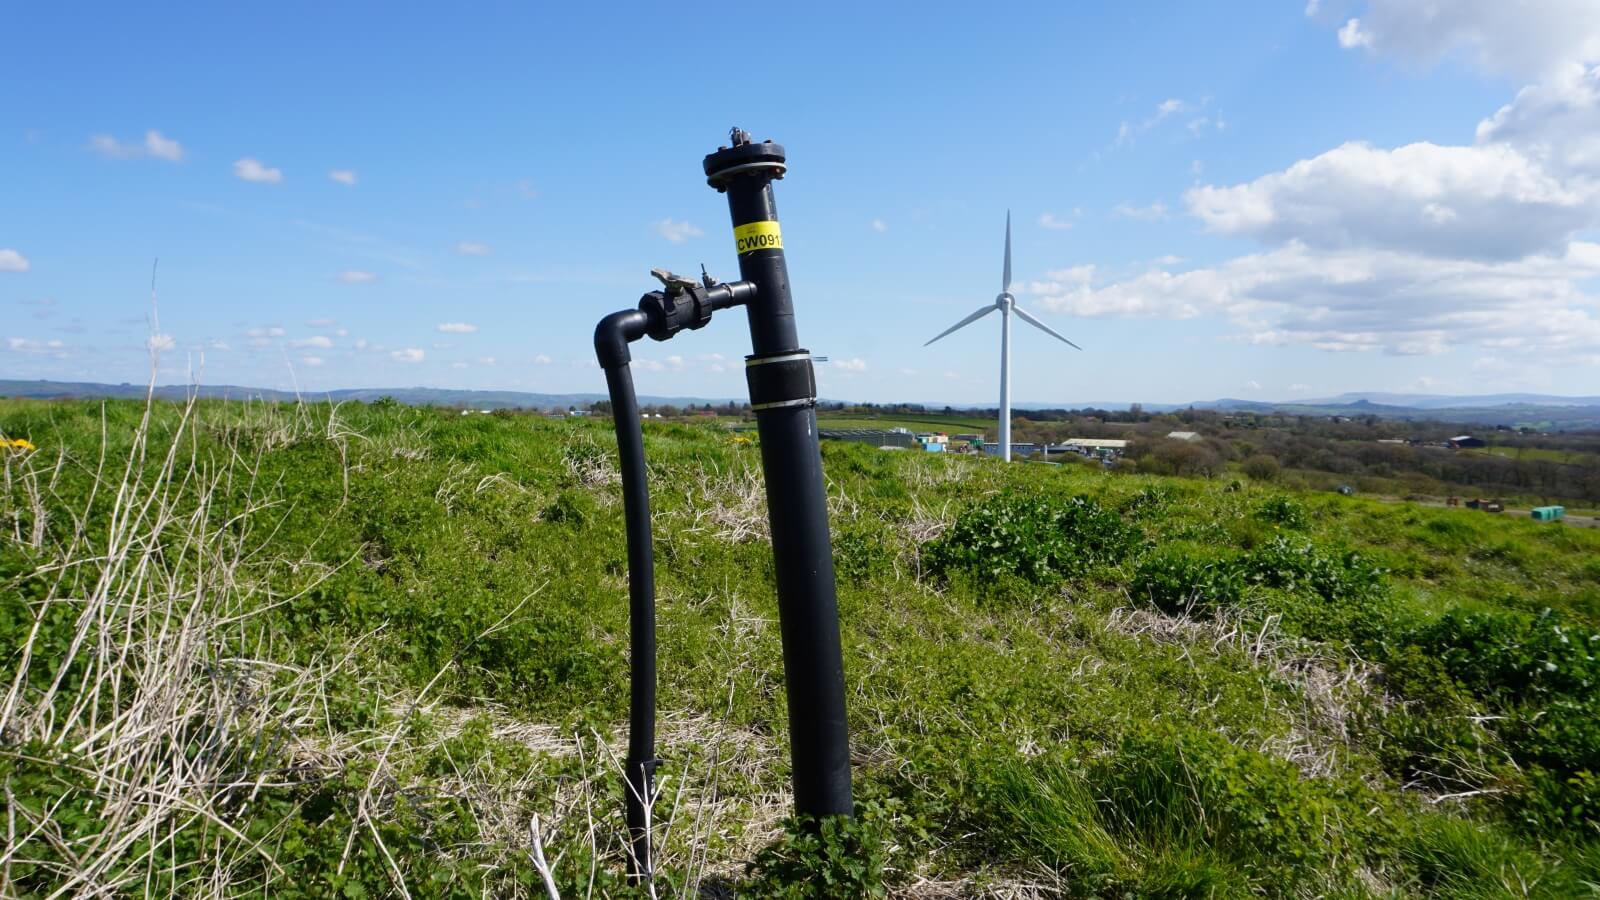 Landfill gas pipe sticking out of the ground with a wind turbine in the background